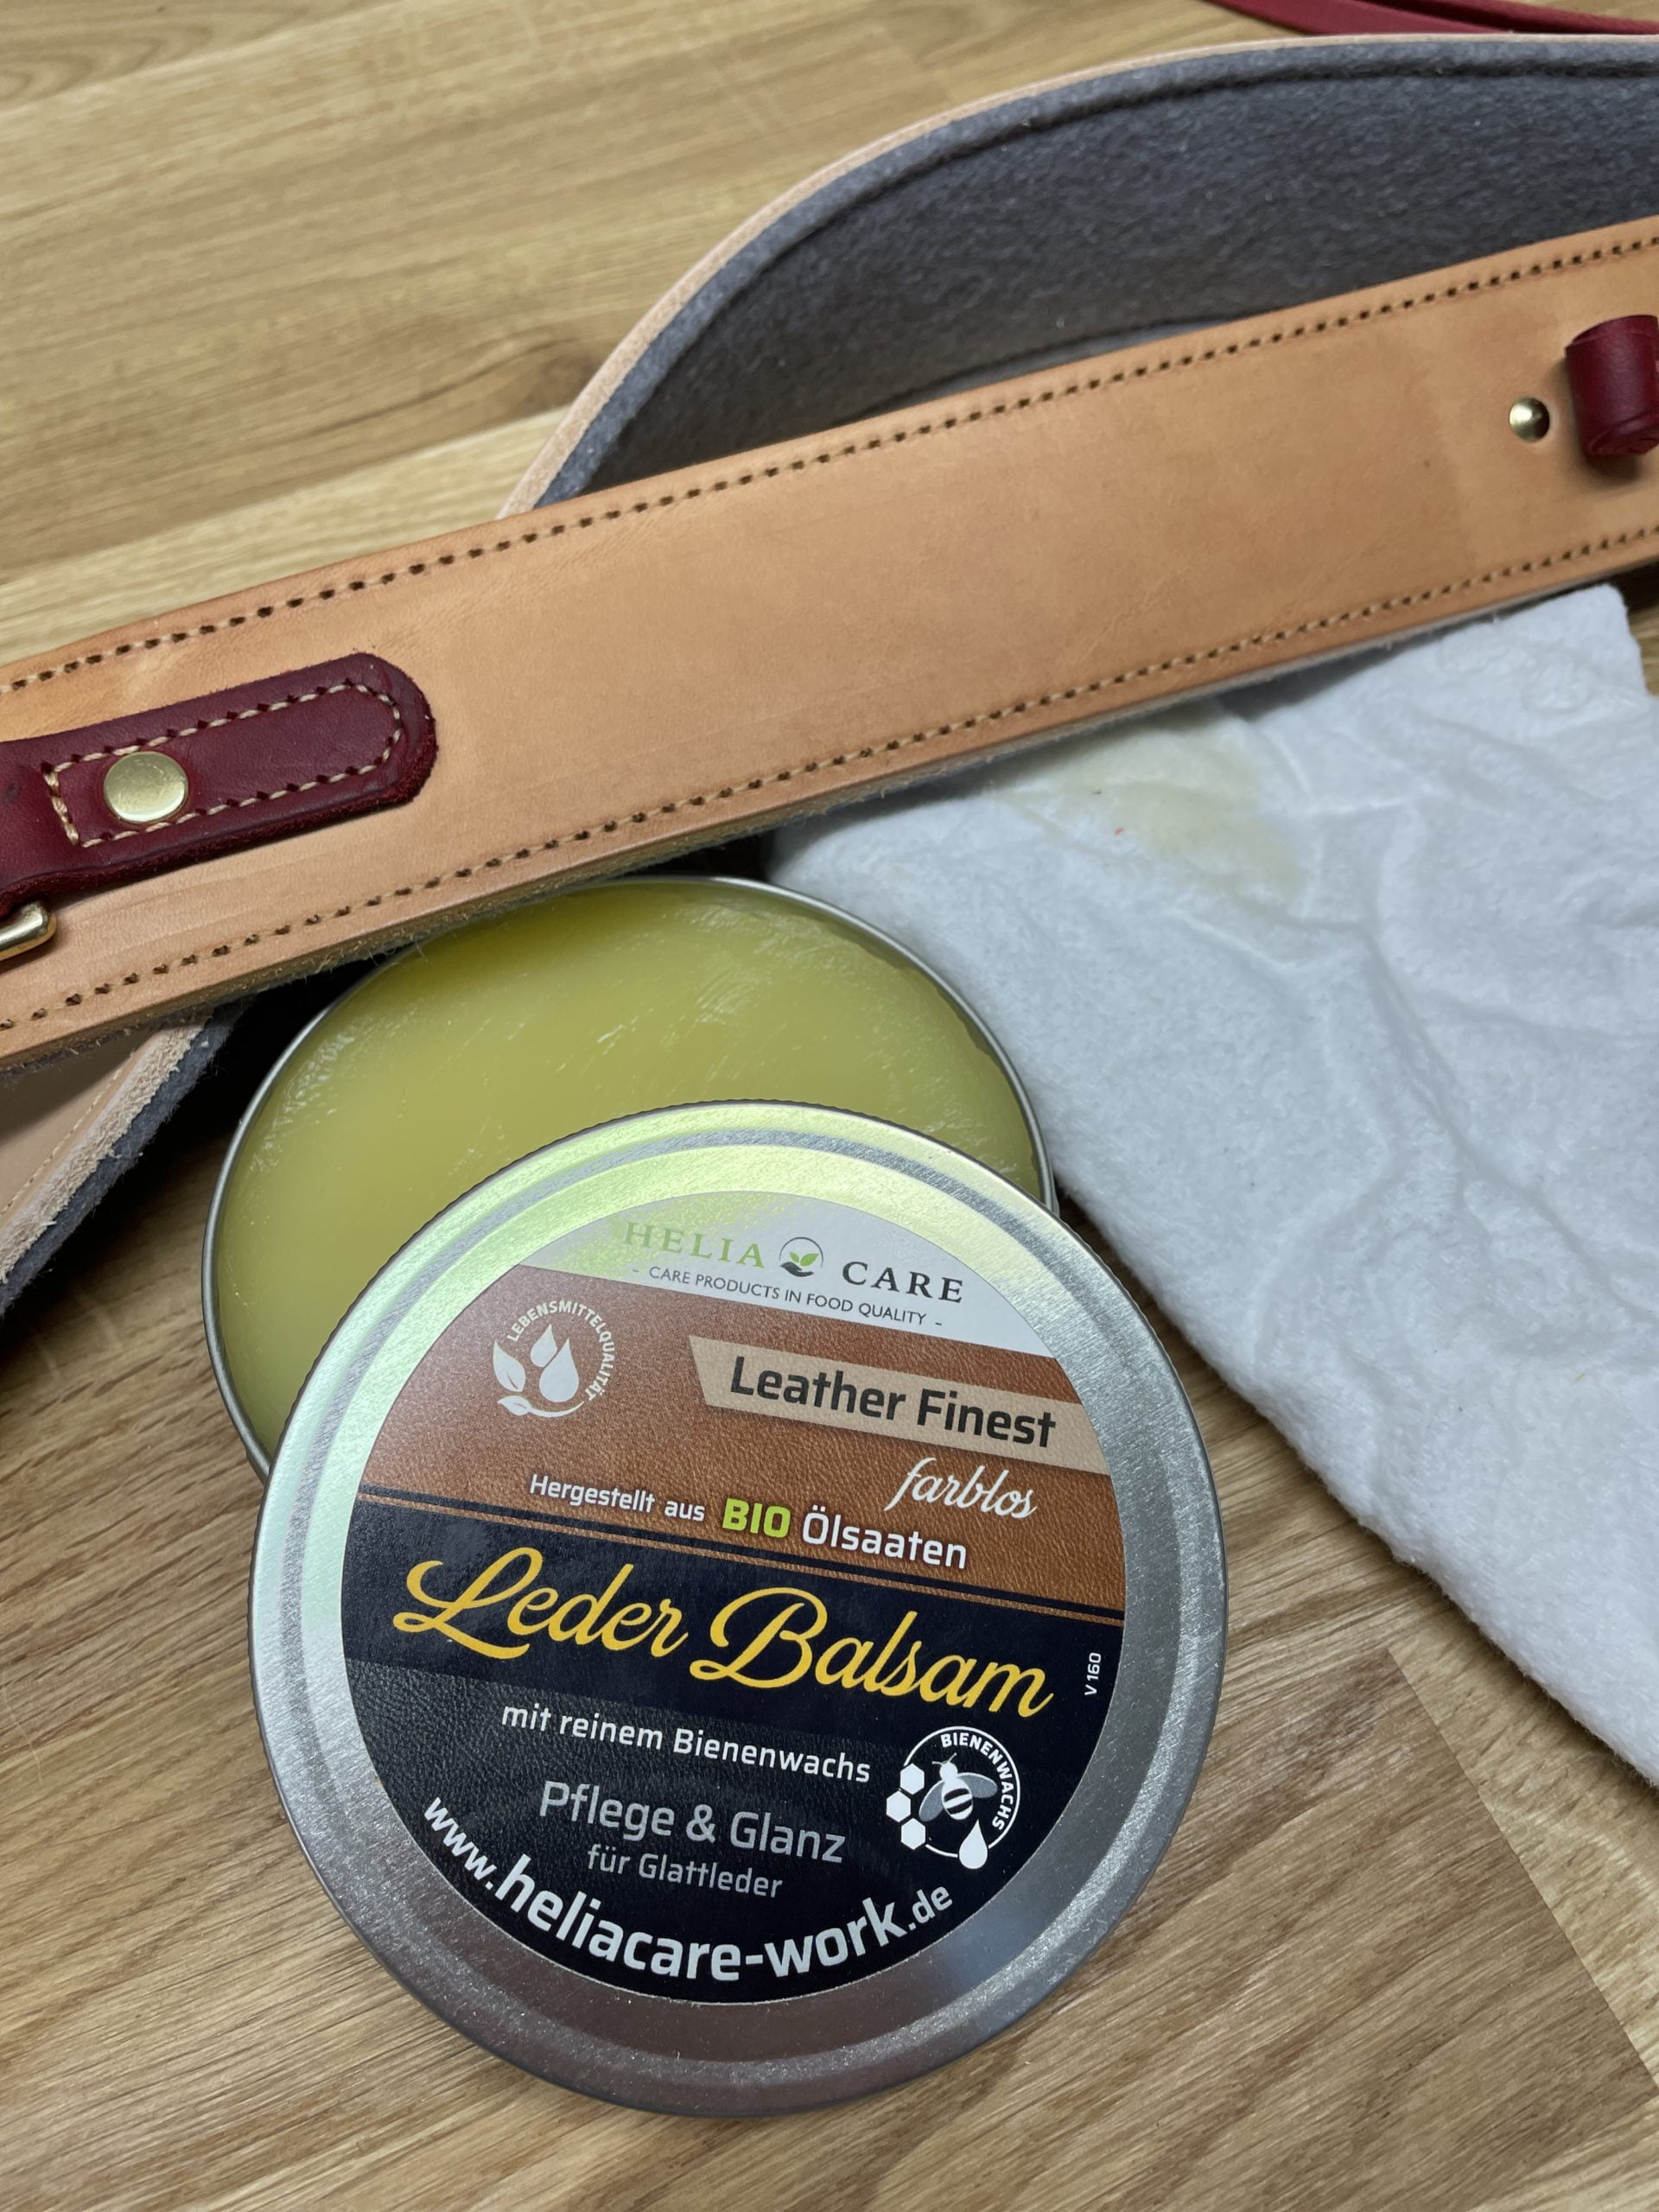 Leather balm application